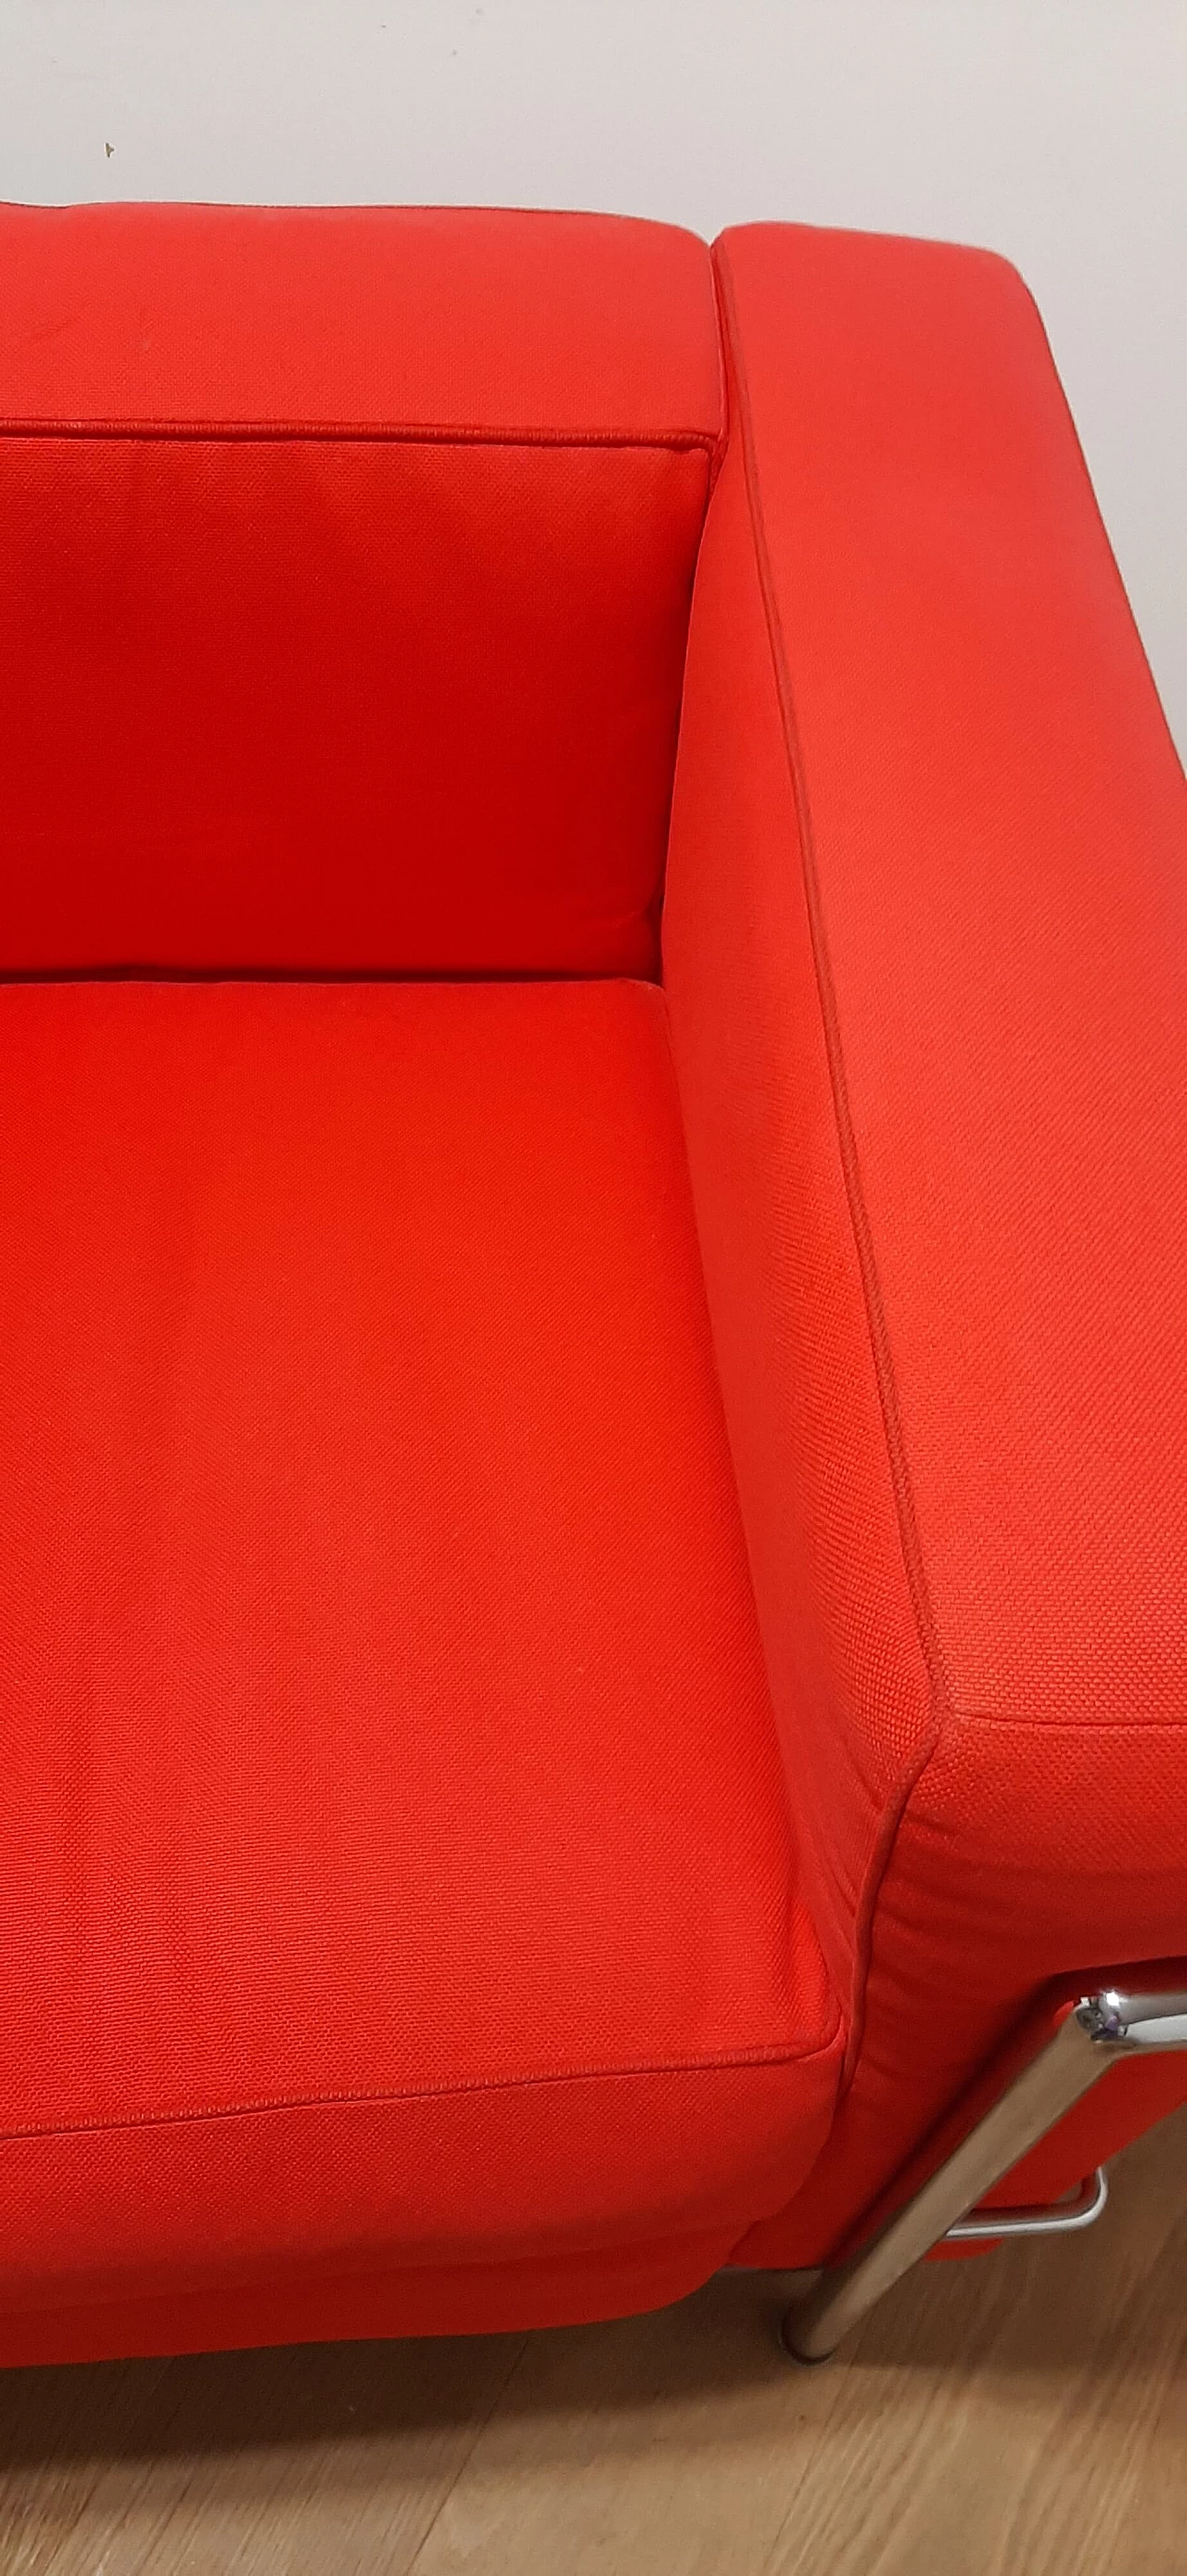 LC 2 armchair in red cotton by Le Corbusier, P. Jeanneret, C. Perriand for Alivar, 1980s 39